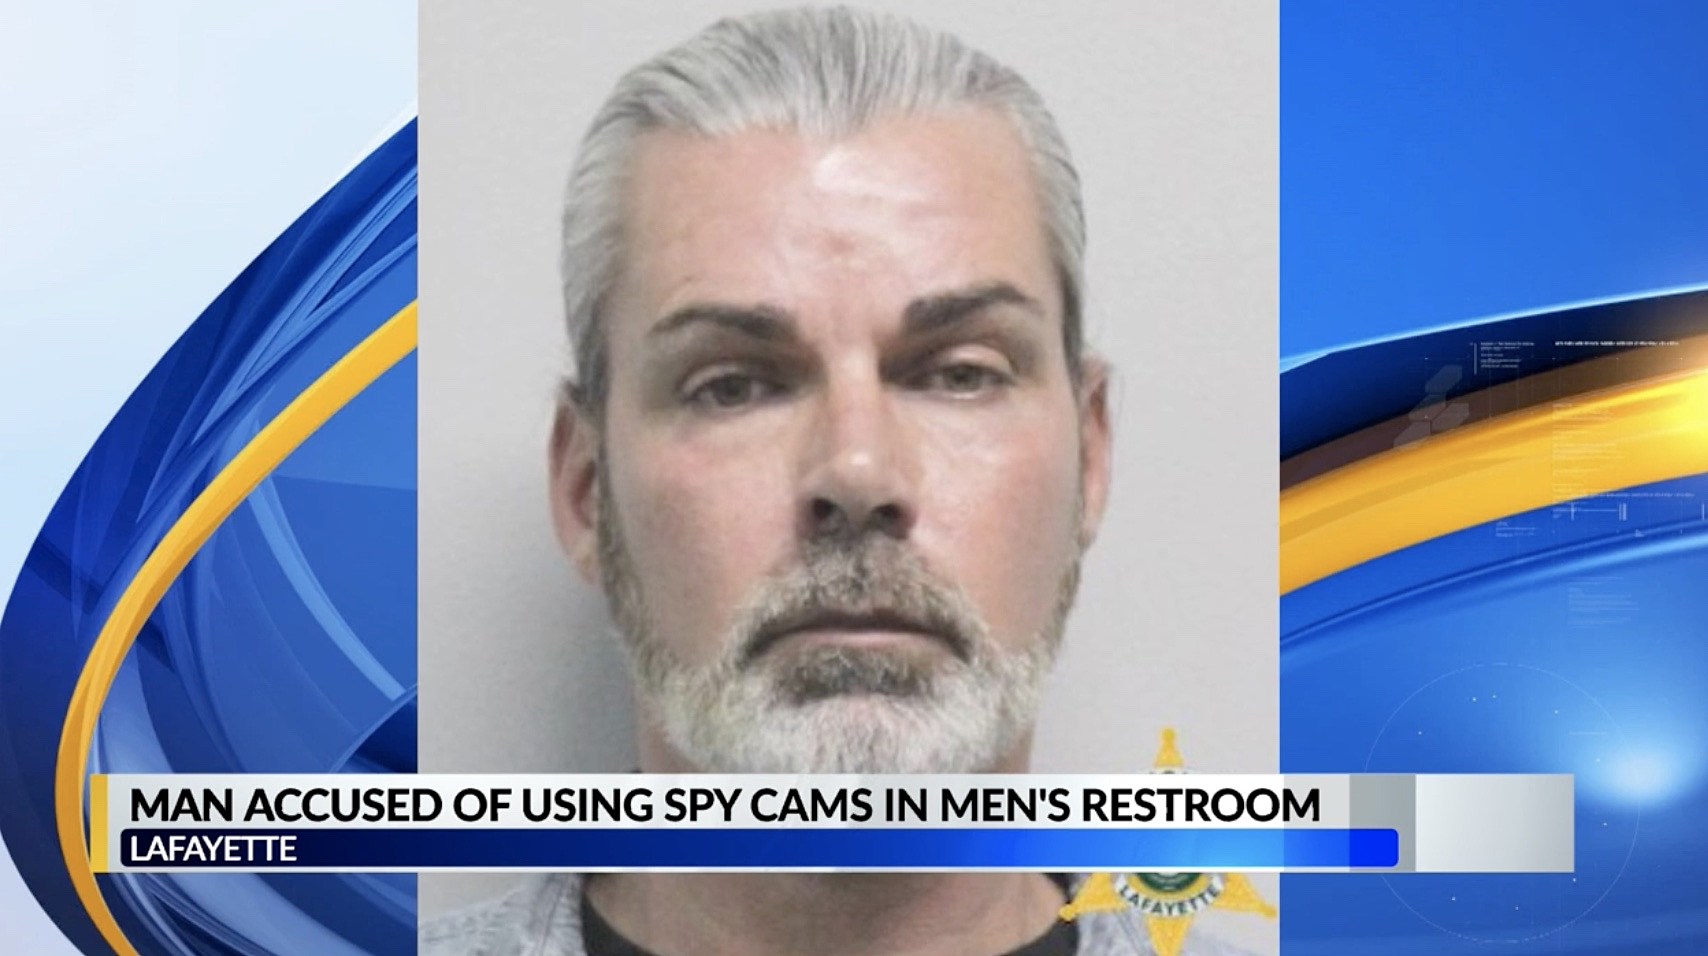 Man Accused of Putting Spy Cams in Restroom Of Lafayette Building pic